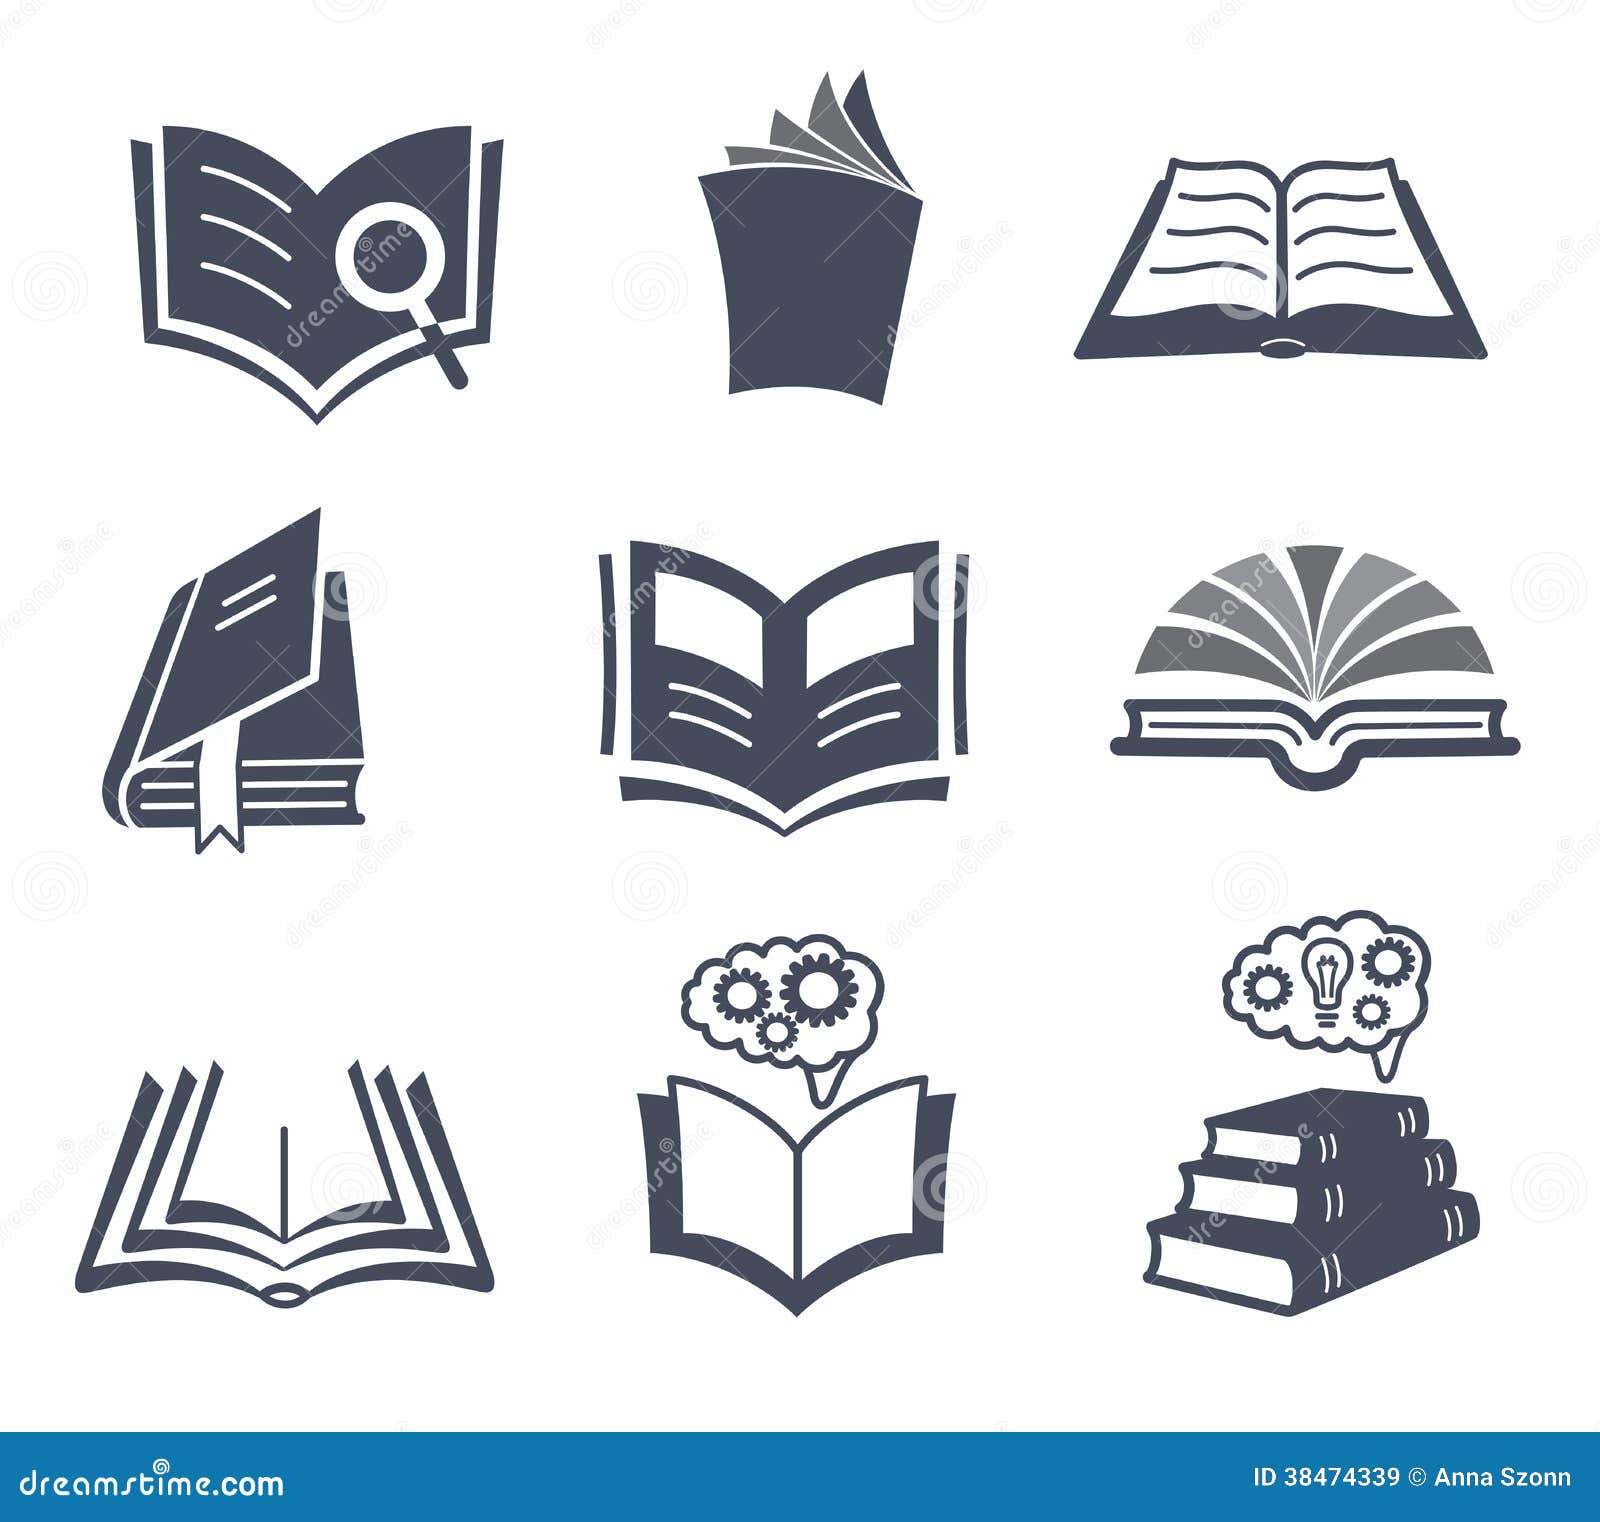 vector free download book - photo #50